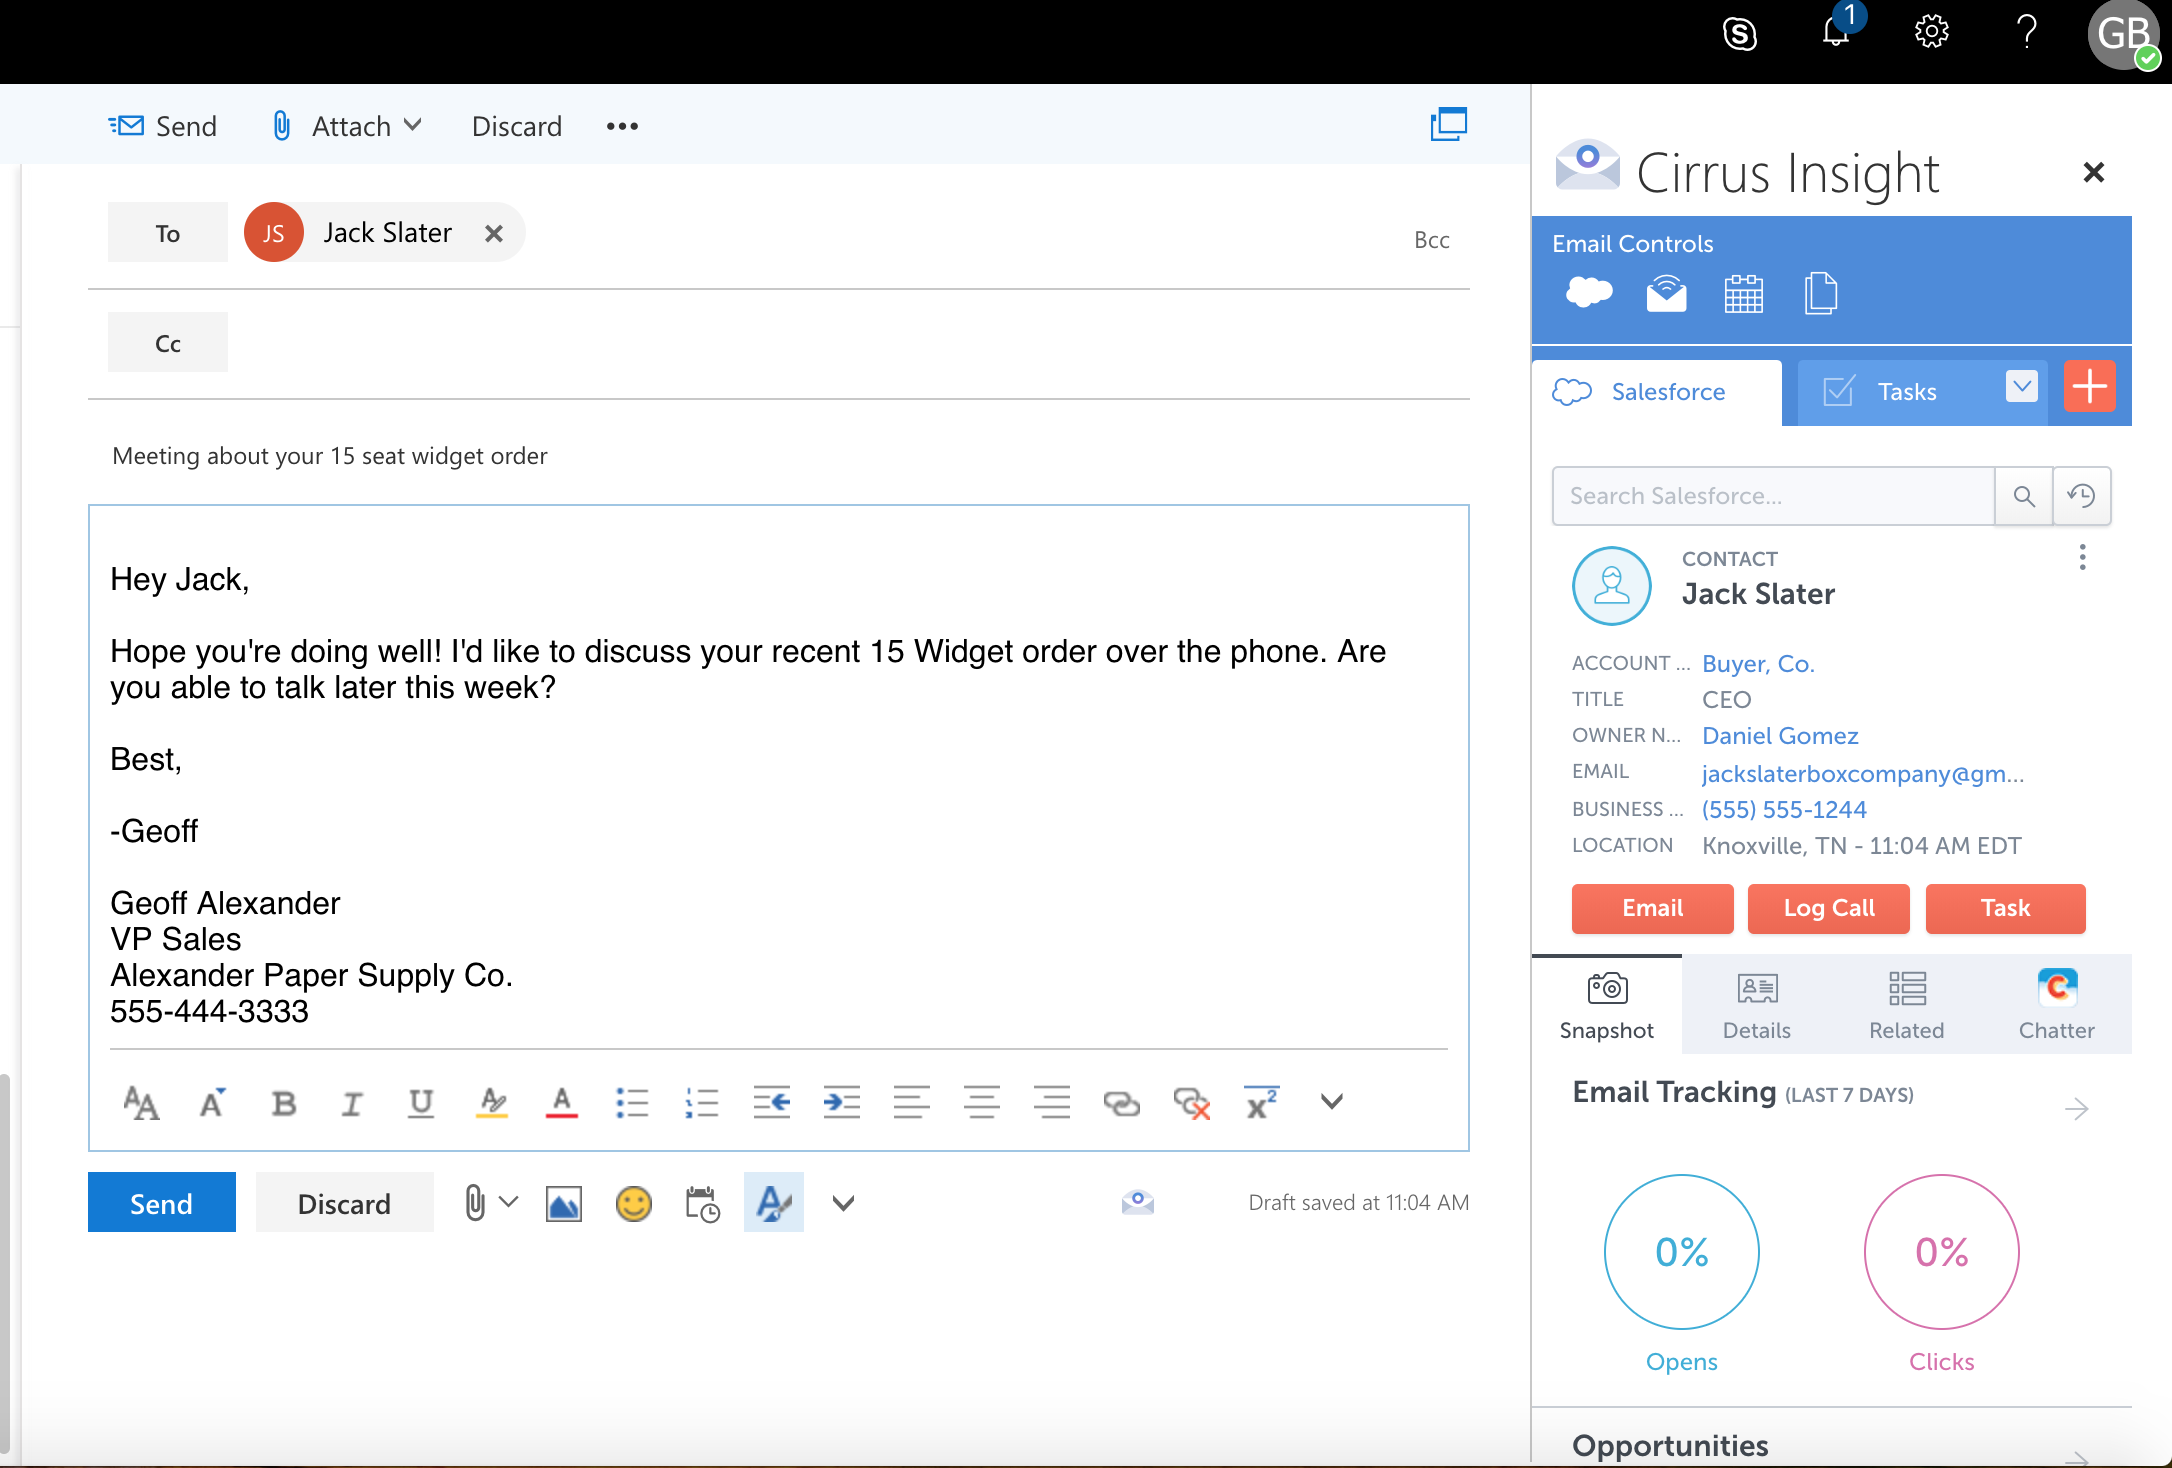 outlook-cirrus-insight-announcement